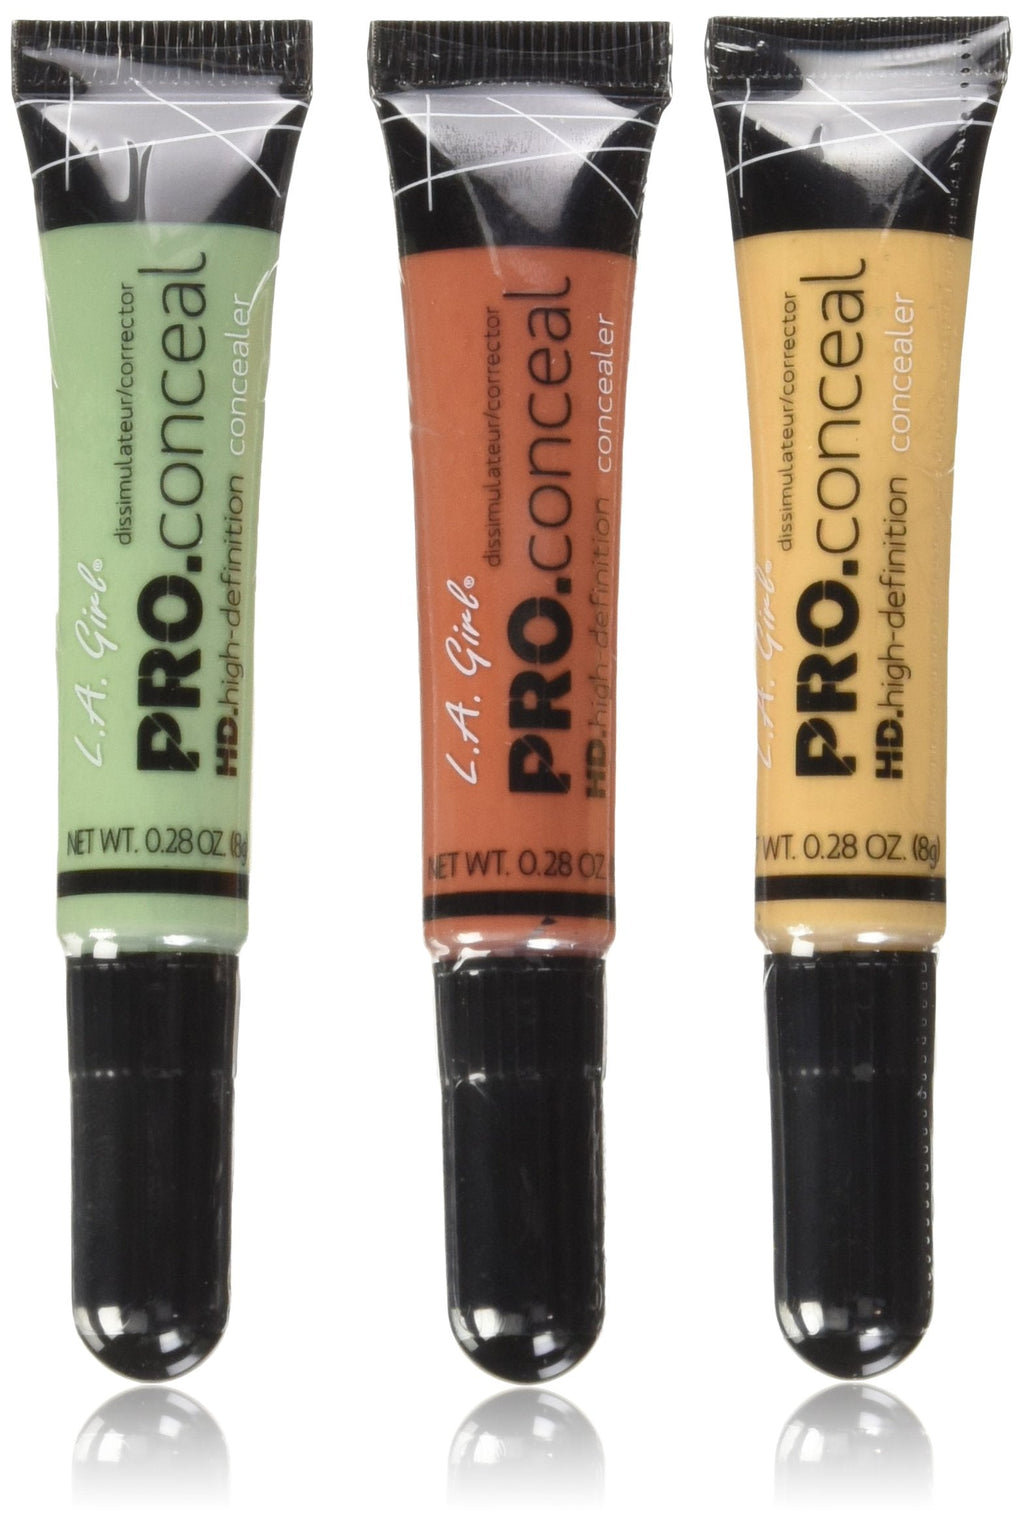 3 Pcs L.A. Girl Pro Conceal HD High Definition Concealer & Corrector Orange 990 Yellow 991 Green 9920.25 Oz. by L.A. Girl 281.23 kg (Pack of 3) - BeesActive Australia